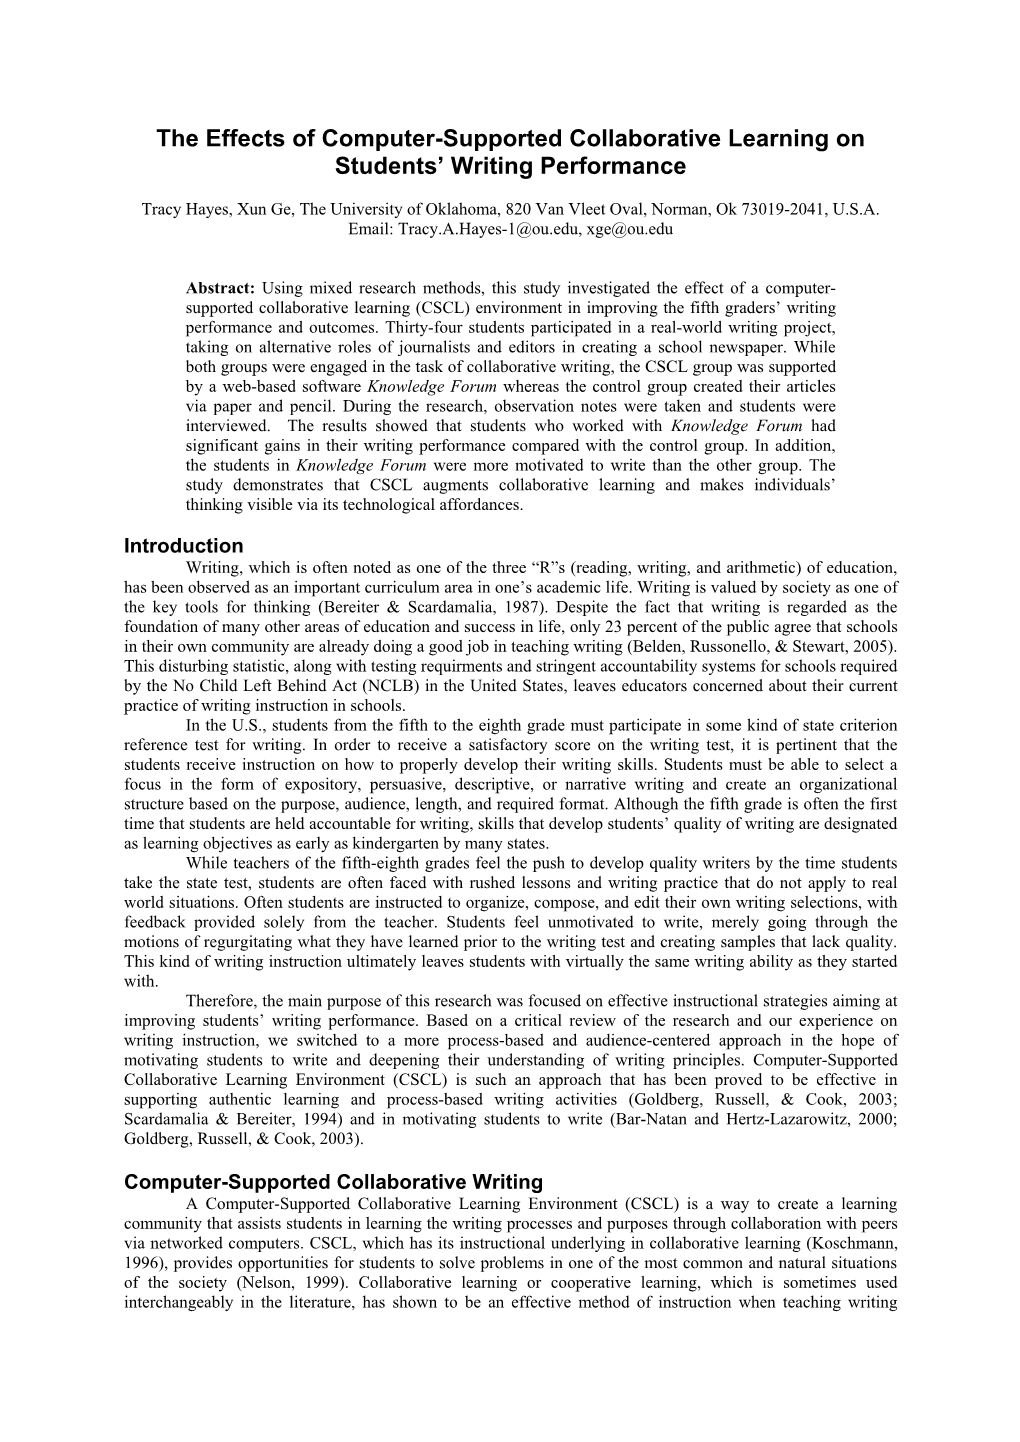 The Effects of Computer-Supported Collaborative Learning on Students’ Writing Performance